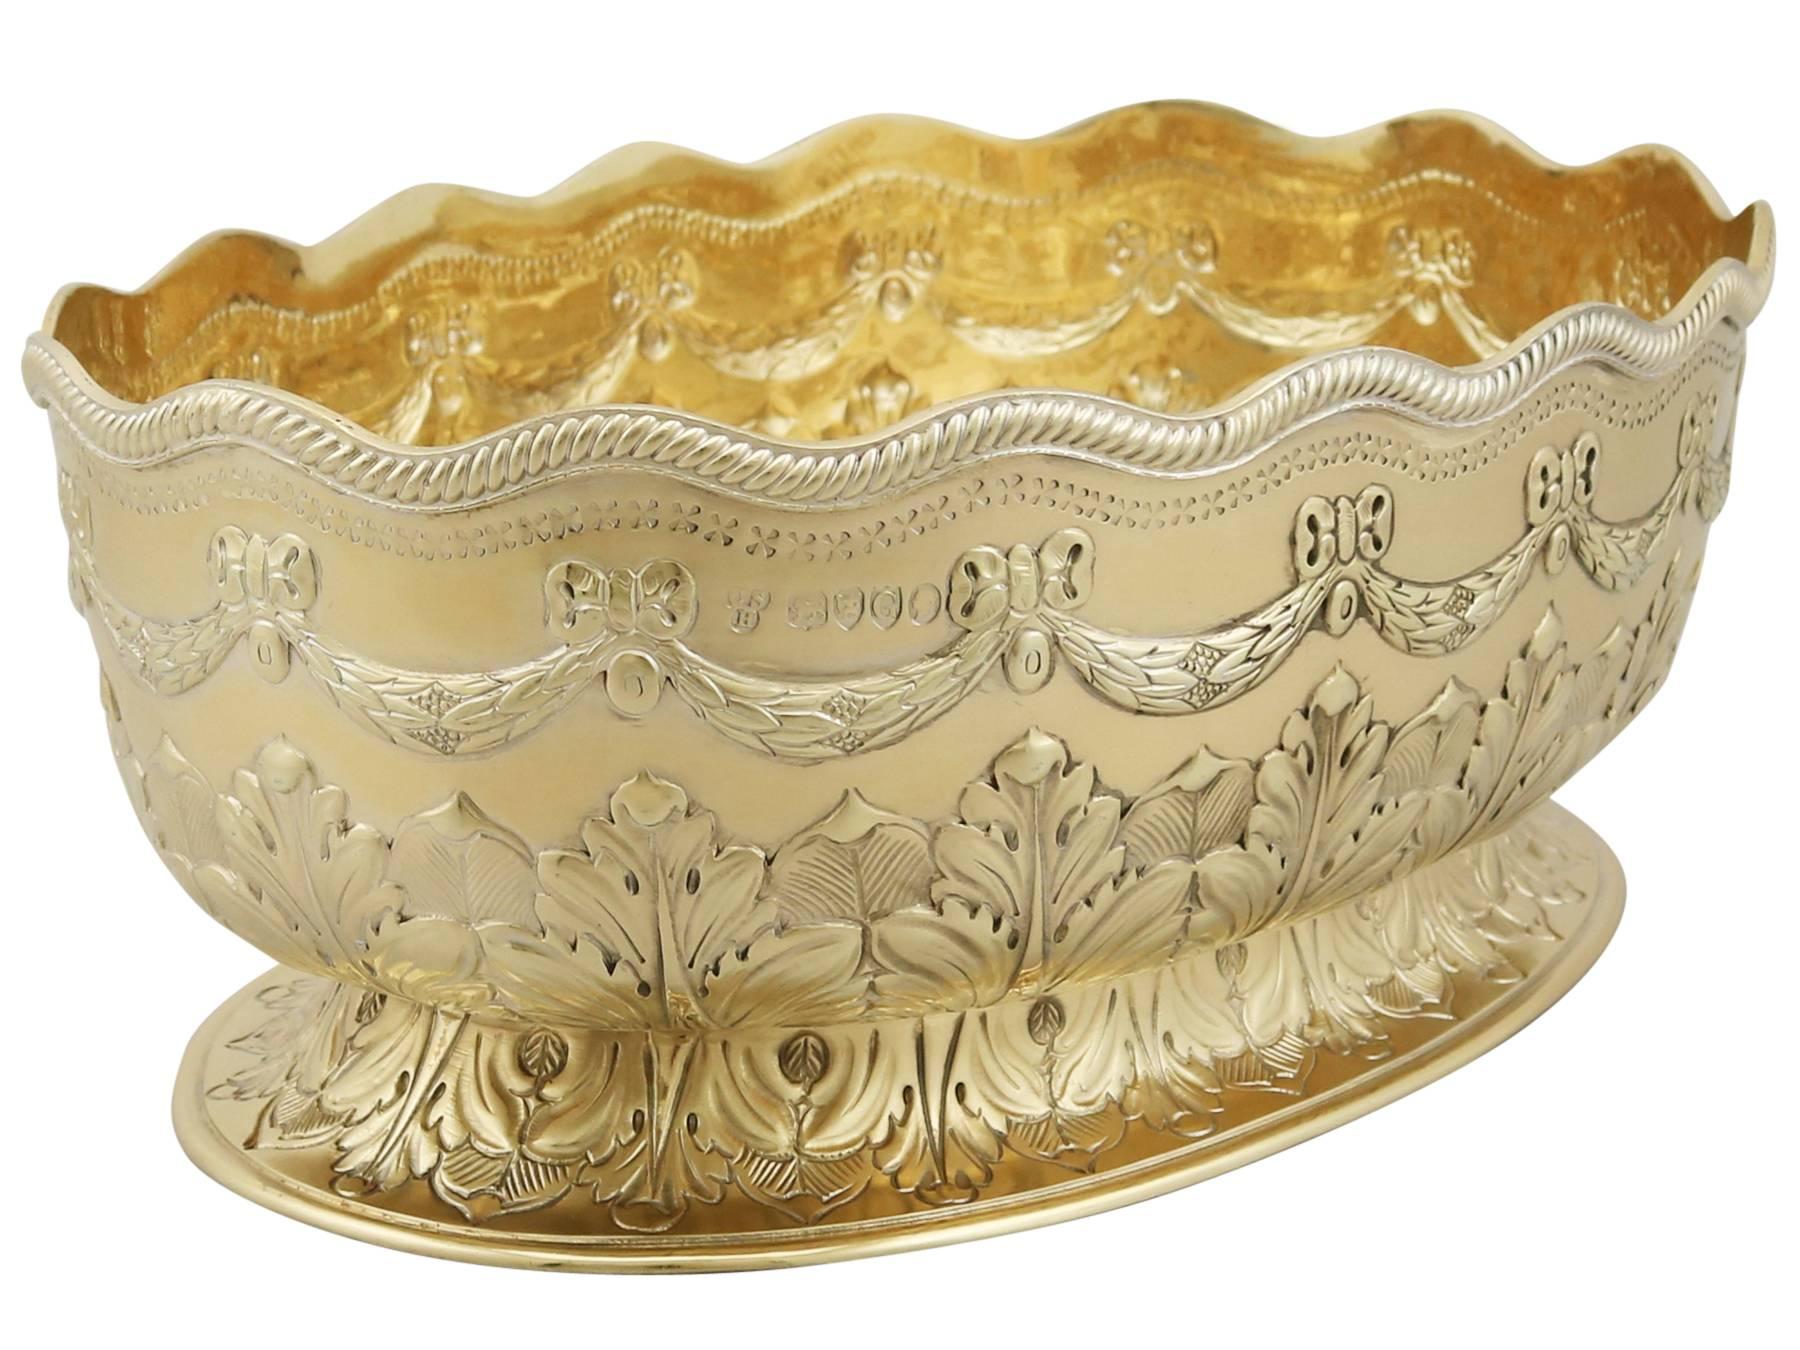 Great Britain (UK) 1880s Pair of Sterling Silver Gilt Presentation Dishes by Charles Stuart Harris